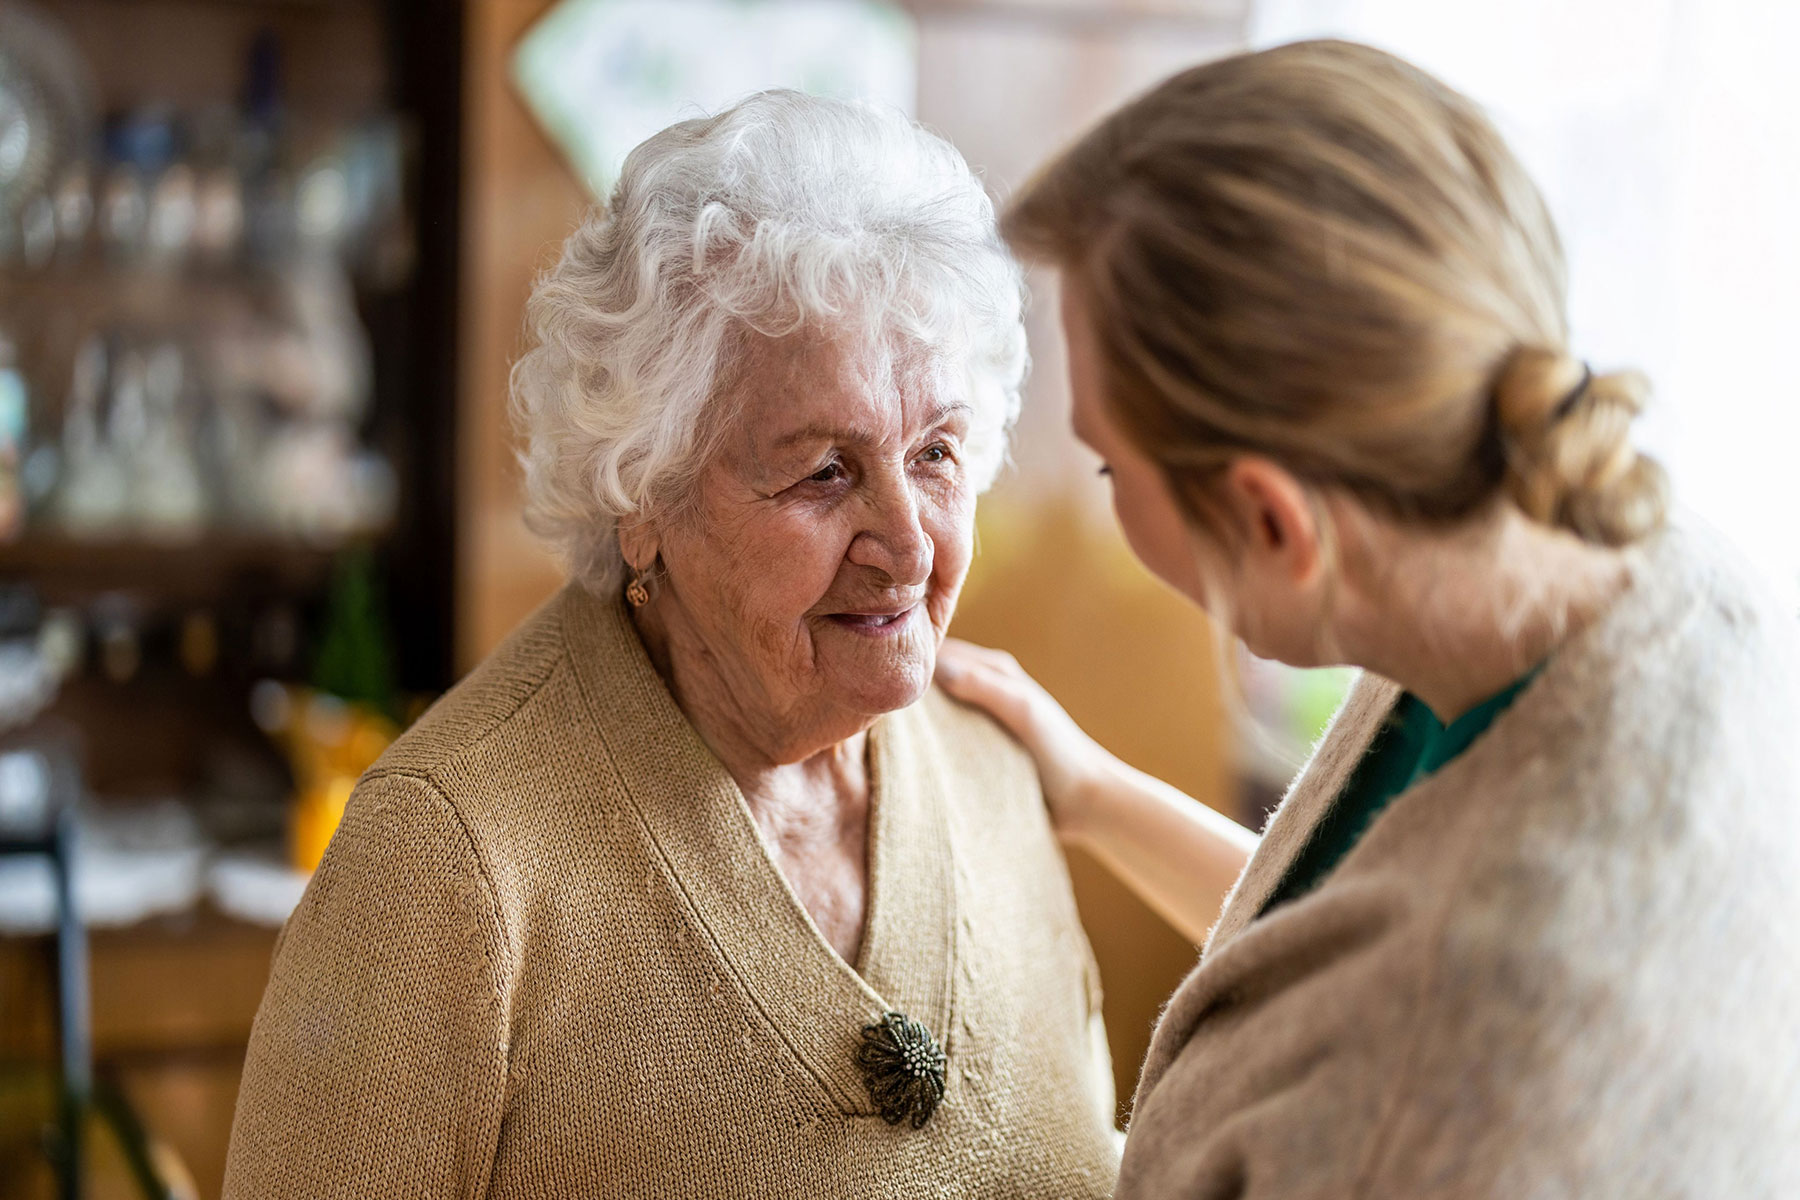 Staged Memory Care, talking with resident